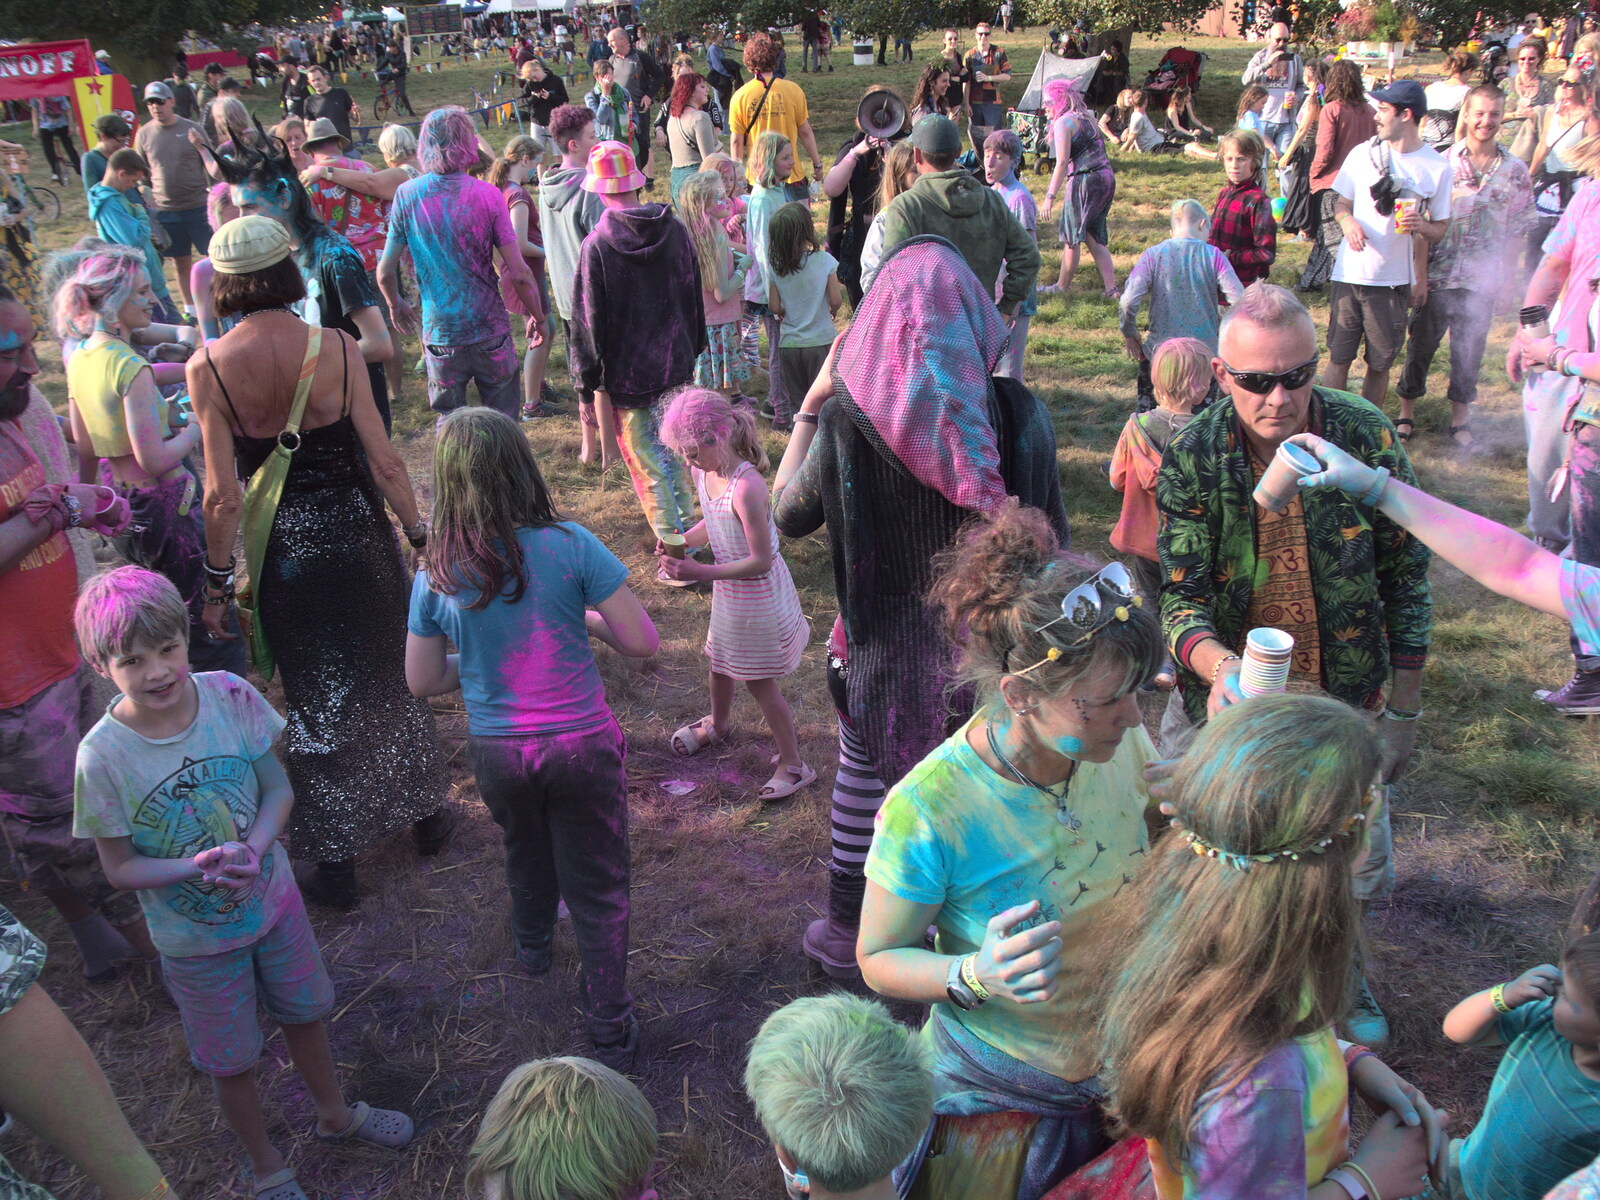 After the paint fight from Maui Waui Festival, Hill Farm, Gressenhall, Norfolk - 28th August 2021